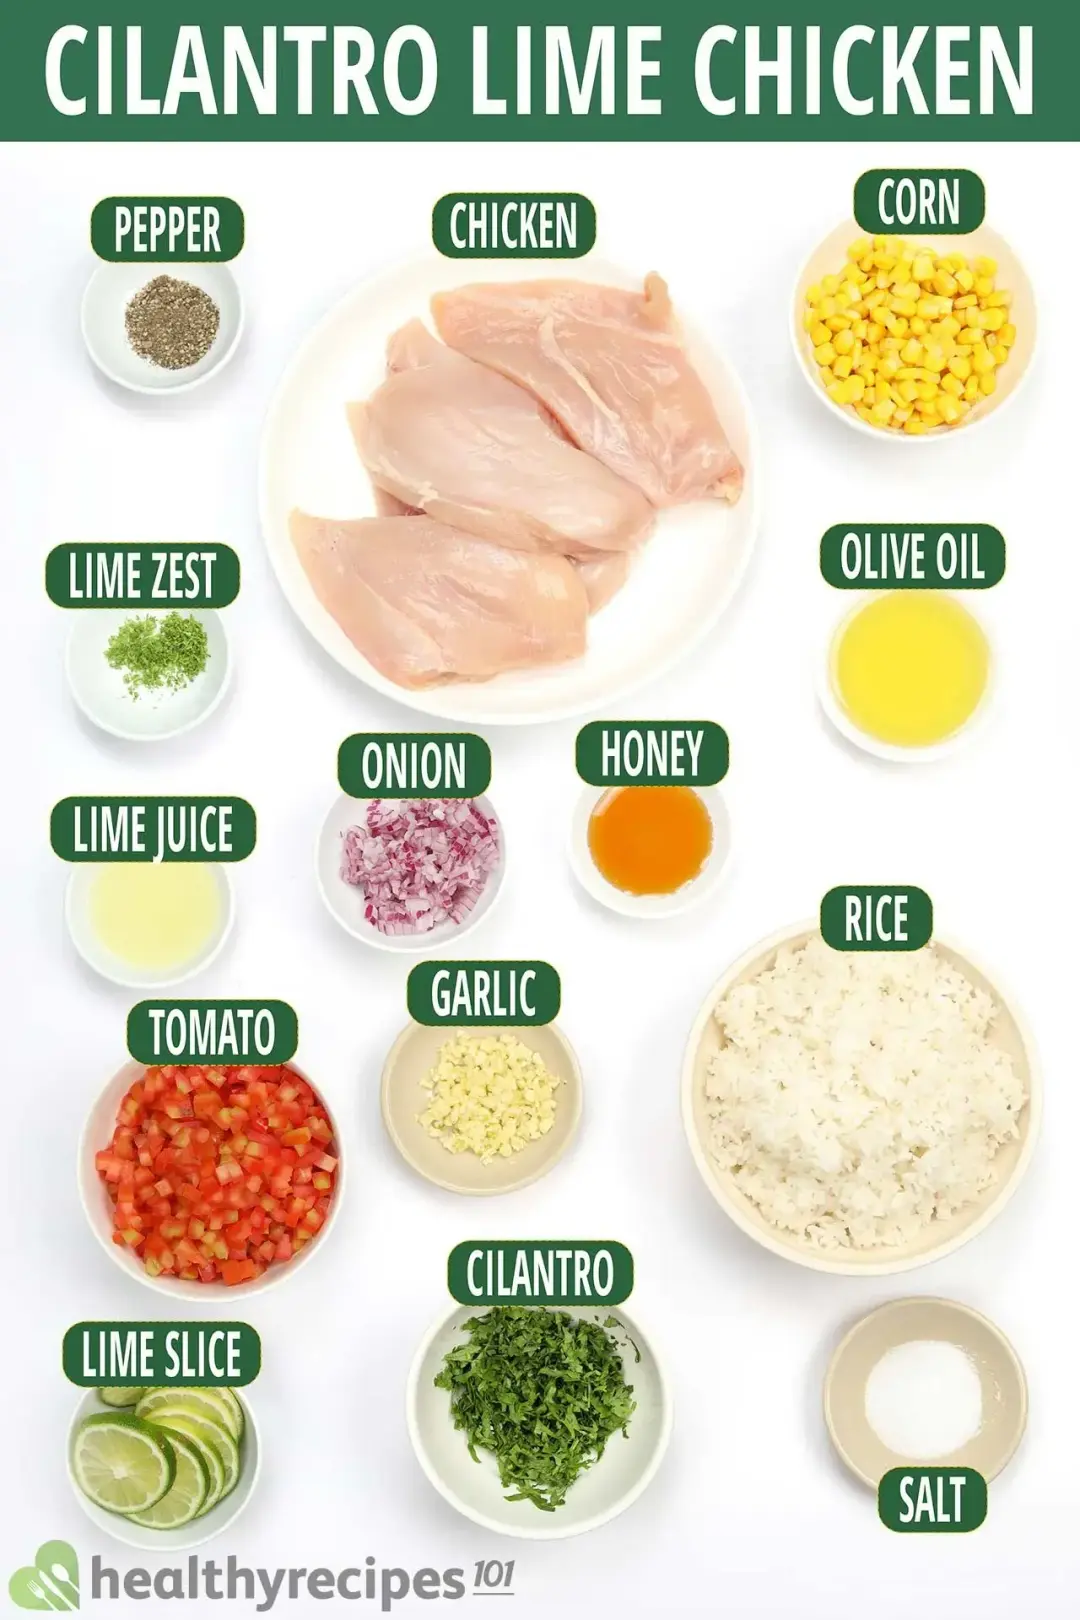 ingredients for Cilantro Lime Chicken